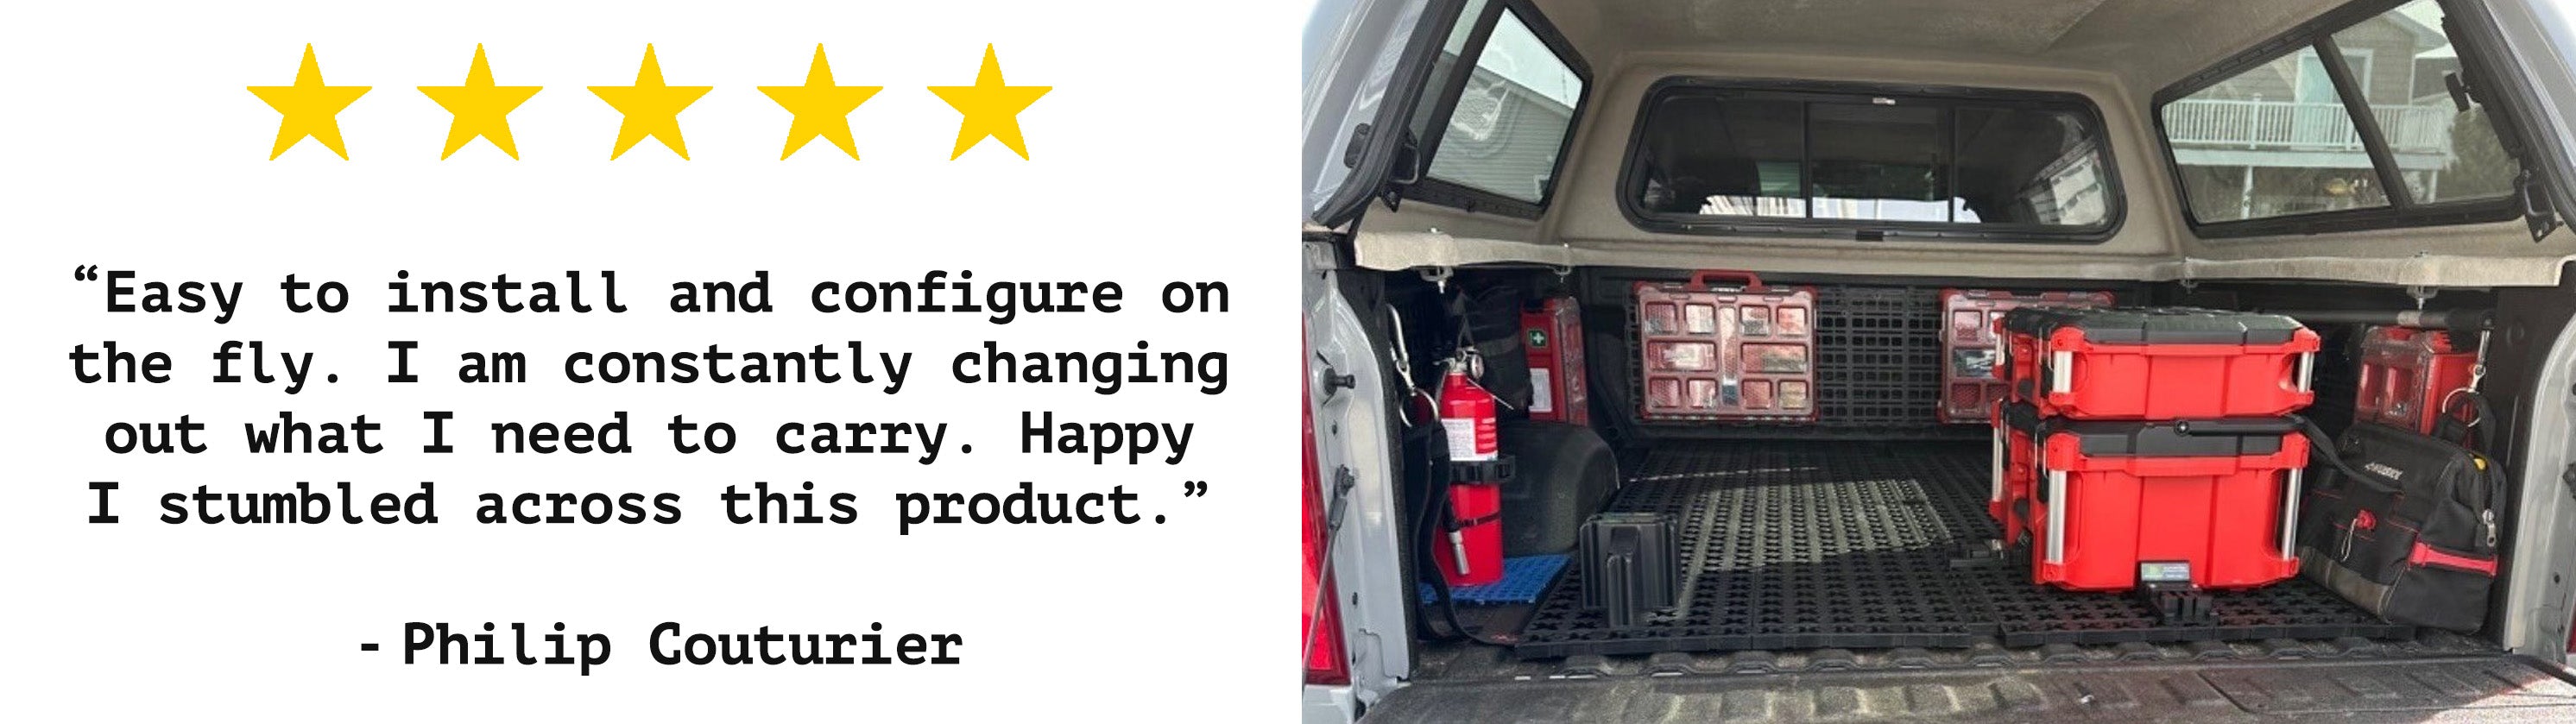 "Easy to install and configure on the fly. I am constantly changing out what I need to carry. Happy I stumbled across this product." - Philip Couturier